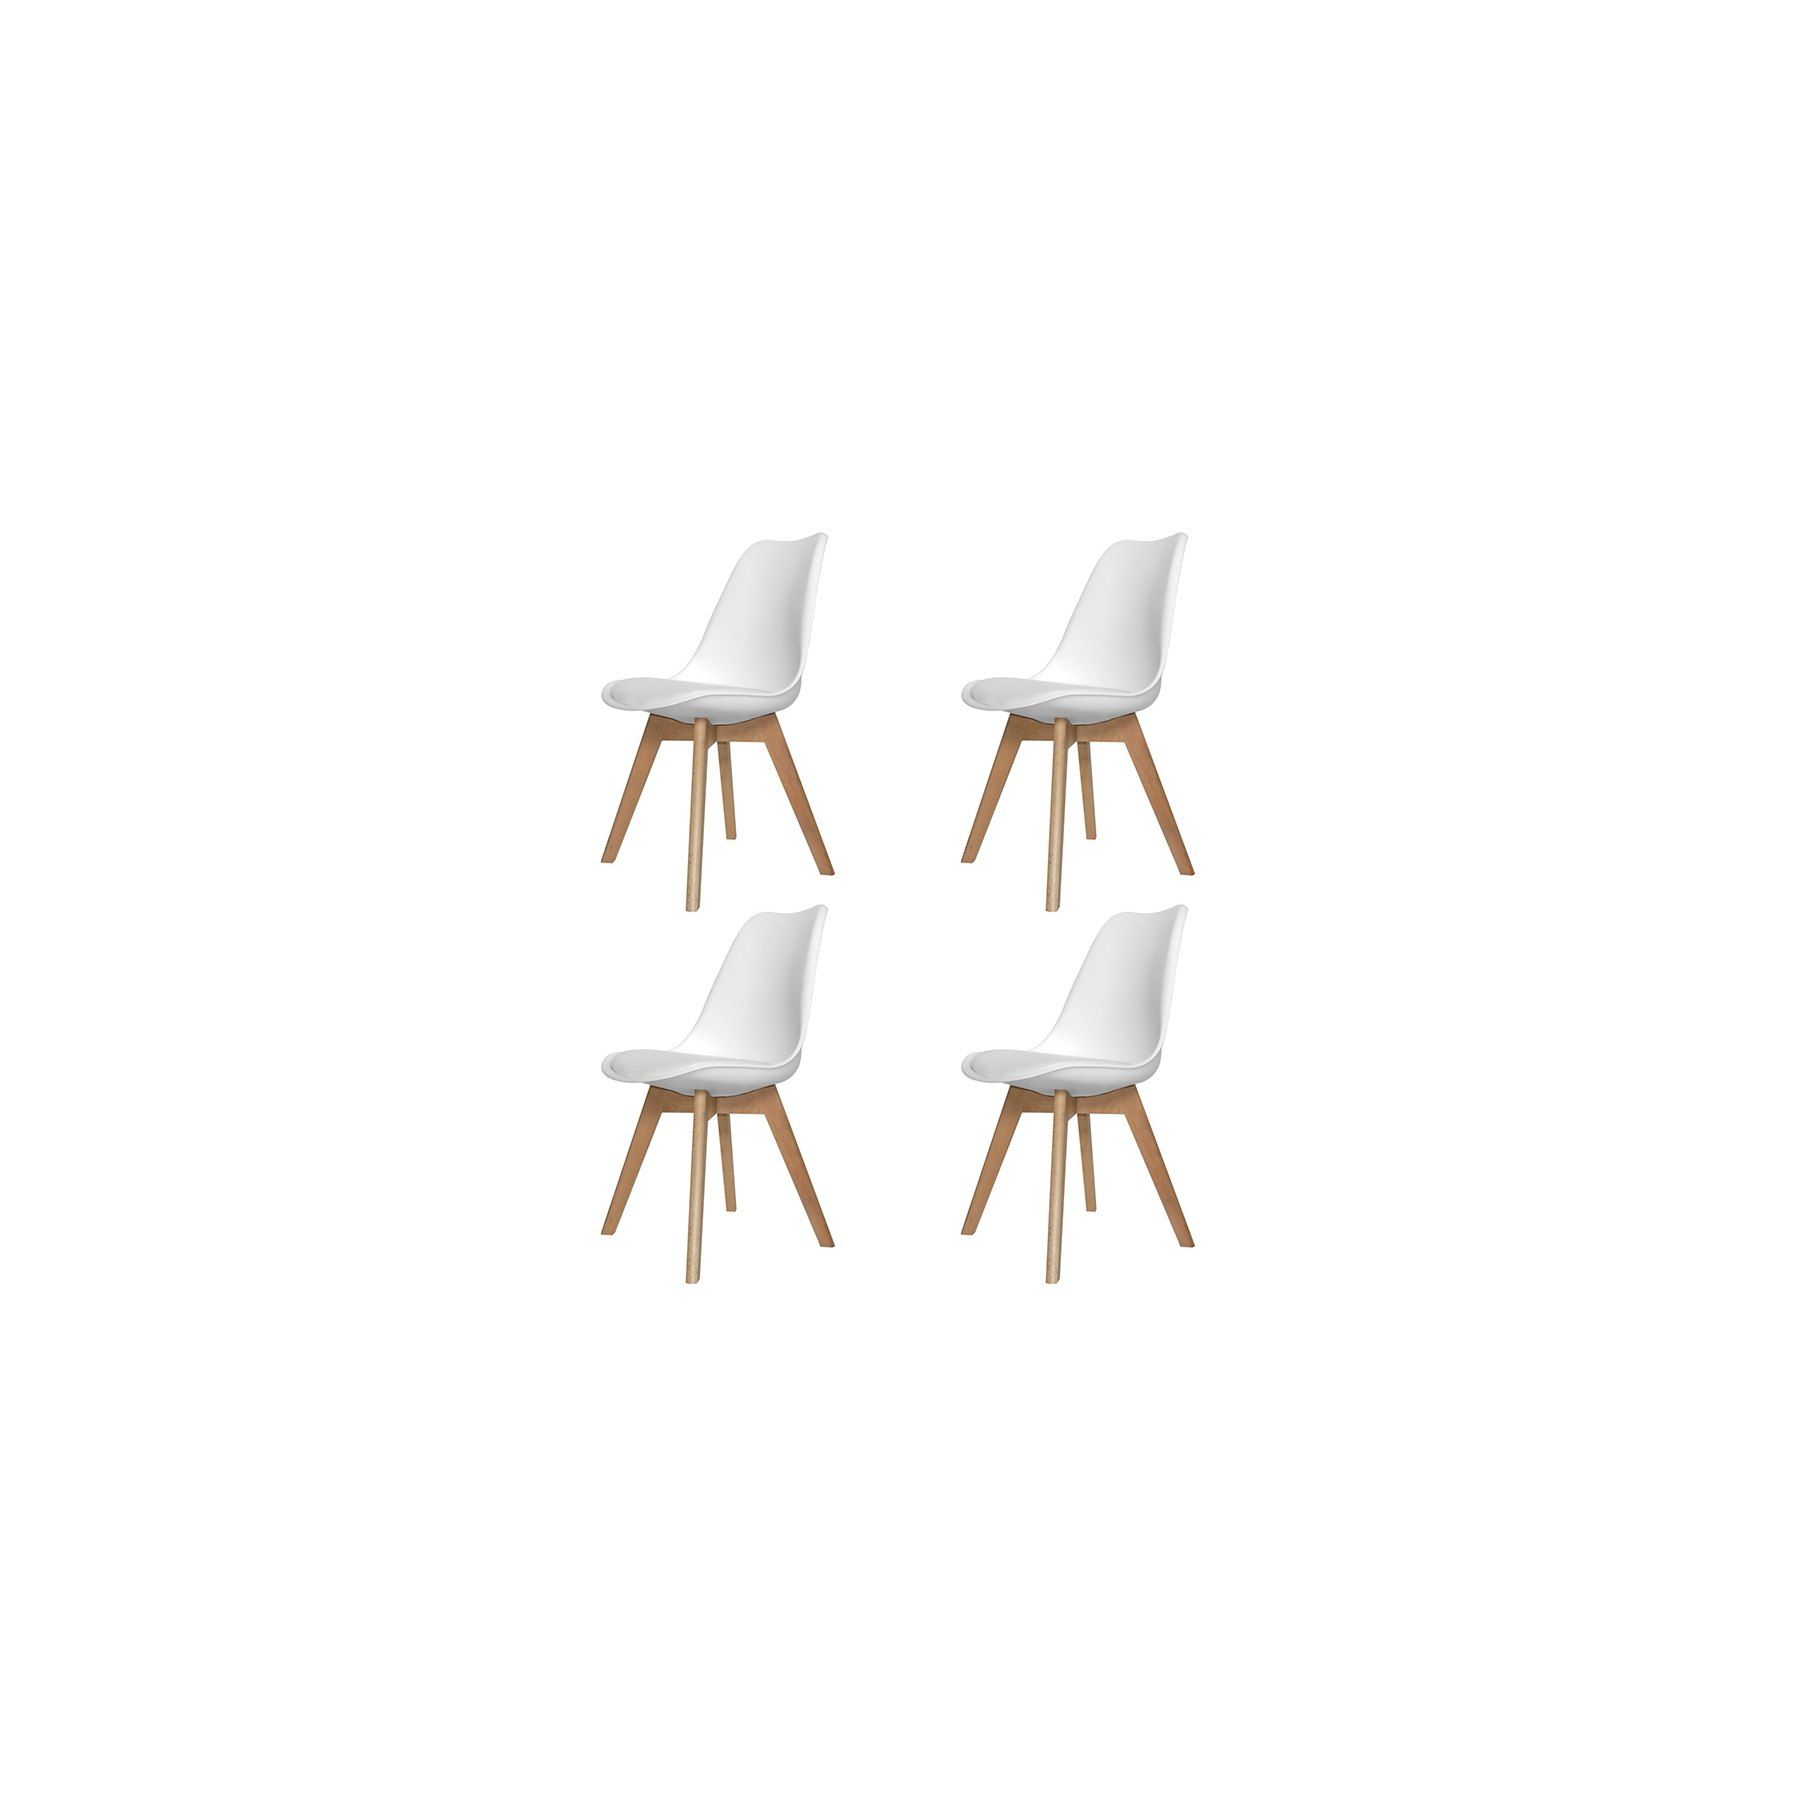 PACK 4 CHAISES NEW TOWER WOOD BLANCH